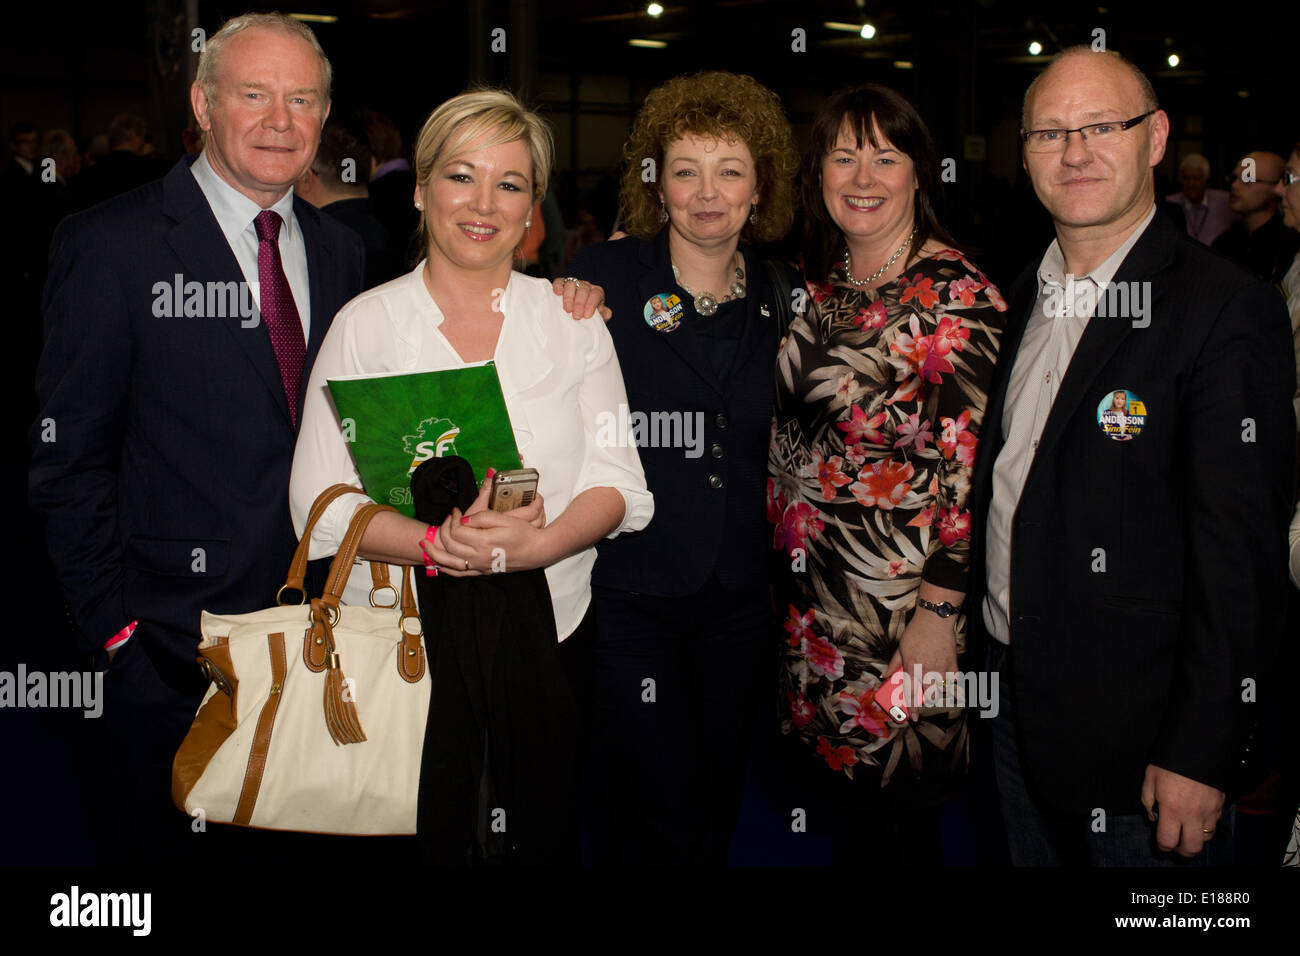 Belfast, UK. 26th May, 2014. Deputy First Minister Martin MGuinness, Michelle O'Neill, Ciara Ni Chualain, Michelle Gildernew and Paul Maskey MP at European Election Results Credit:  Bonzo/Alamy Live News Stock Photo